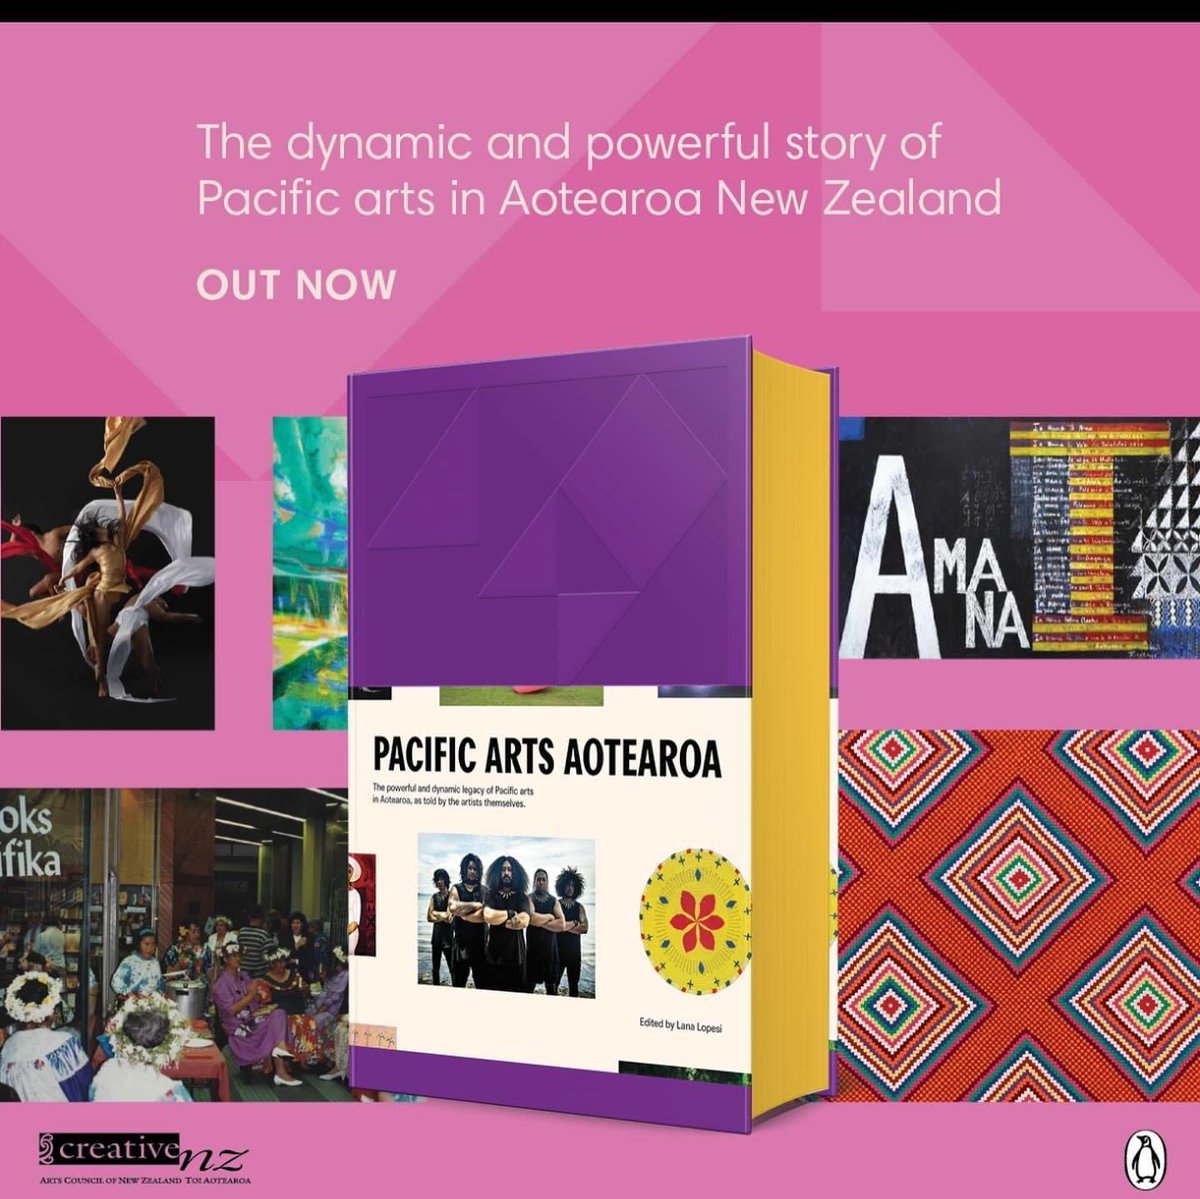 Honored to be featured on the cover of Pacific Arts Aotearoa! This beautiful book showcases the vibrant and powerful story of Pacific arts in Aotearoa New Zealand.

Published by @PenguinBooks_NZ @CreativeNZ and Edited by Lana Lopesi. Grab your copy now! 🔥